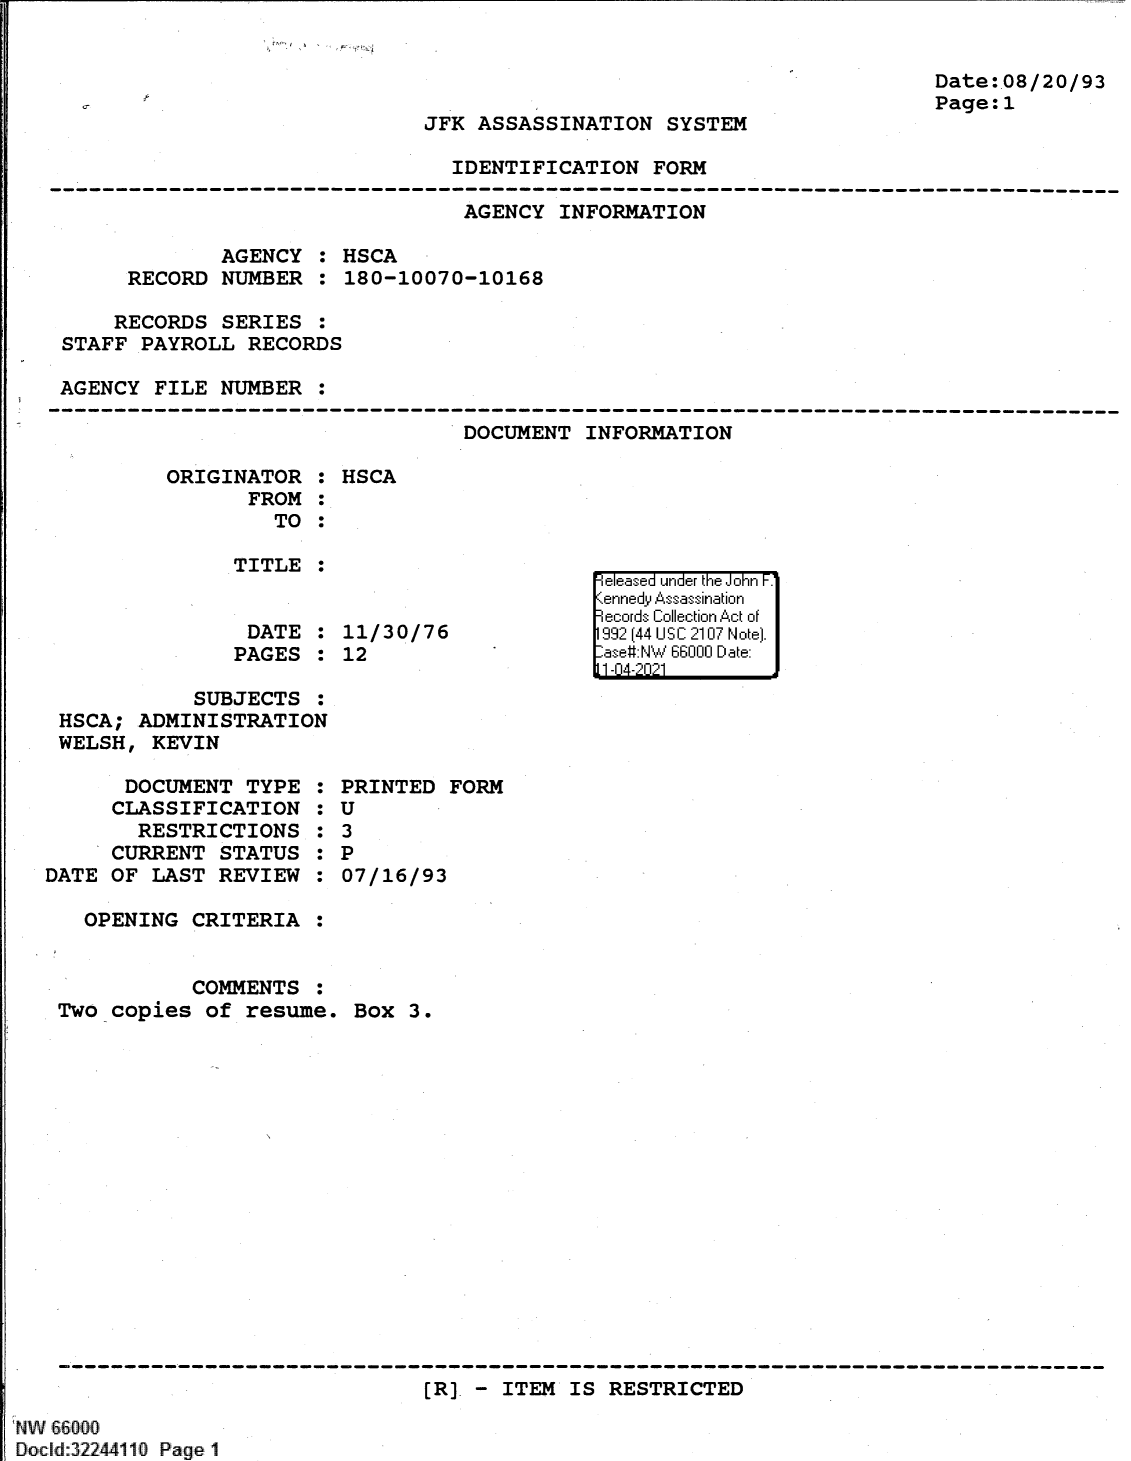 handle is hein.jfk/jfkarch61371 and id is 1 raw text is: Date:.08/20/93
Page:1

JFK ASSASSINATION SYSTEM

IDENTIFICATION FORM

AGENCY INFORMATION
AGENCY : HSCA
RECORD NUMBER : 180-10070-10168
RECORDS SERIES :
STAFF PAYROLL RECORDS
AGENCY FILE NUMBER :

DOCUMENT INFORMATION

ORIGINATOR :
FROM :
TO :
TITLE :
DATE :
PAGES :

HSCA
11/30/76
12

SUBJECTS :
HSCA; ADMINISTRATION
WELSH, KEVIN

DOCUMENT TYPE
CLASSIFICATION
RESTRICTIONS
CURRENT STATUS
DATE OF LAST REVIEW
OPENING CRITERIA
COMMENTS

0
0
S
S
S
S
S
S
S
S

PRINTED FORM
U
3
P
07/16/93

Two copies of resume. Box 3.

[R] - ITEM IS RESTRICTED

NW 66000
Docld:32244110 Page 1

e easea  u nder the Joi~hnr F.'
11 -4 'Ii']


